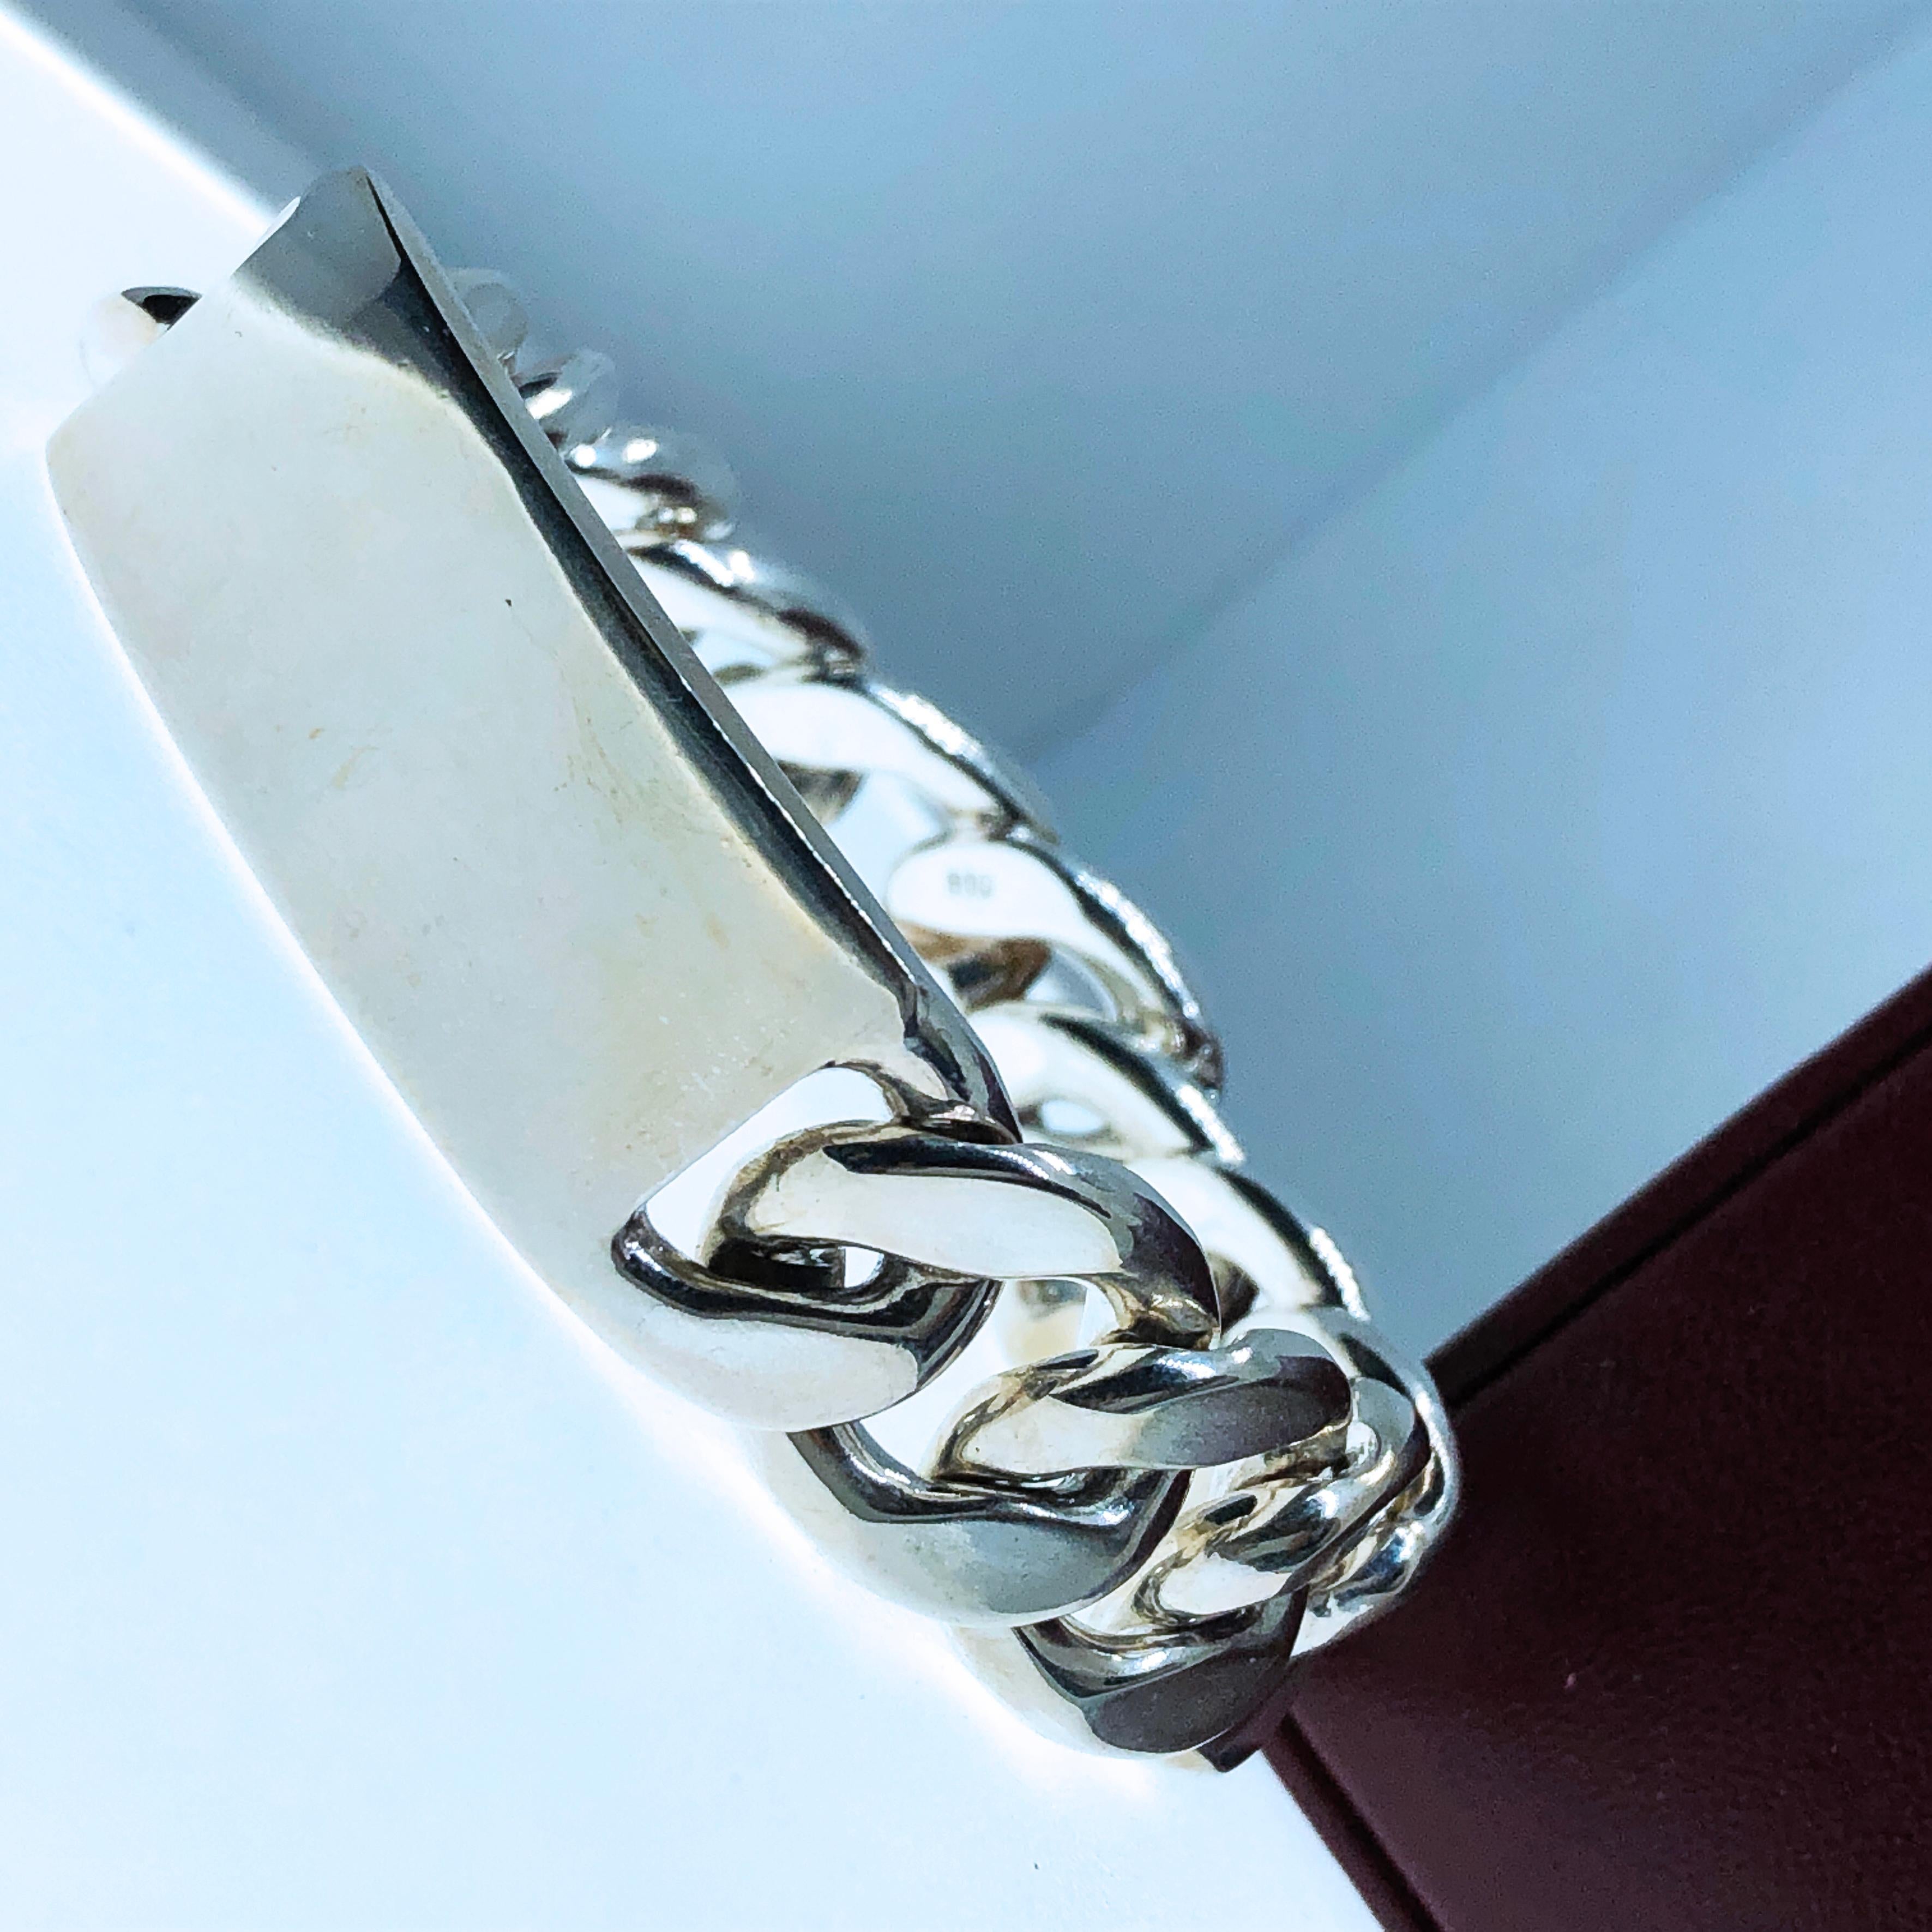 Chic yet Timeless, a 1970 Classic Piece, Solid Handcrafted, Hand Welded Silver Bracelet.

Bracelet Weight: Troy Ounces 3.56 
Lenght: 7.87 inches

We offer complimentary engraving on request






